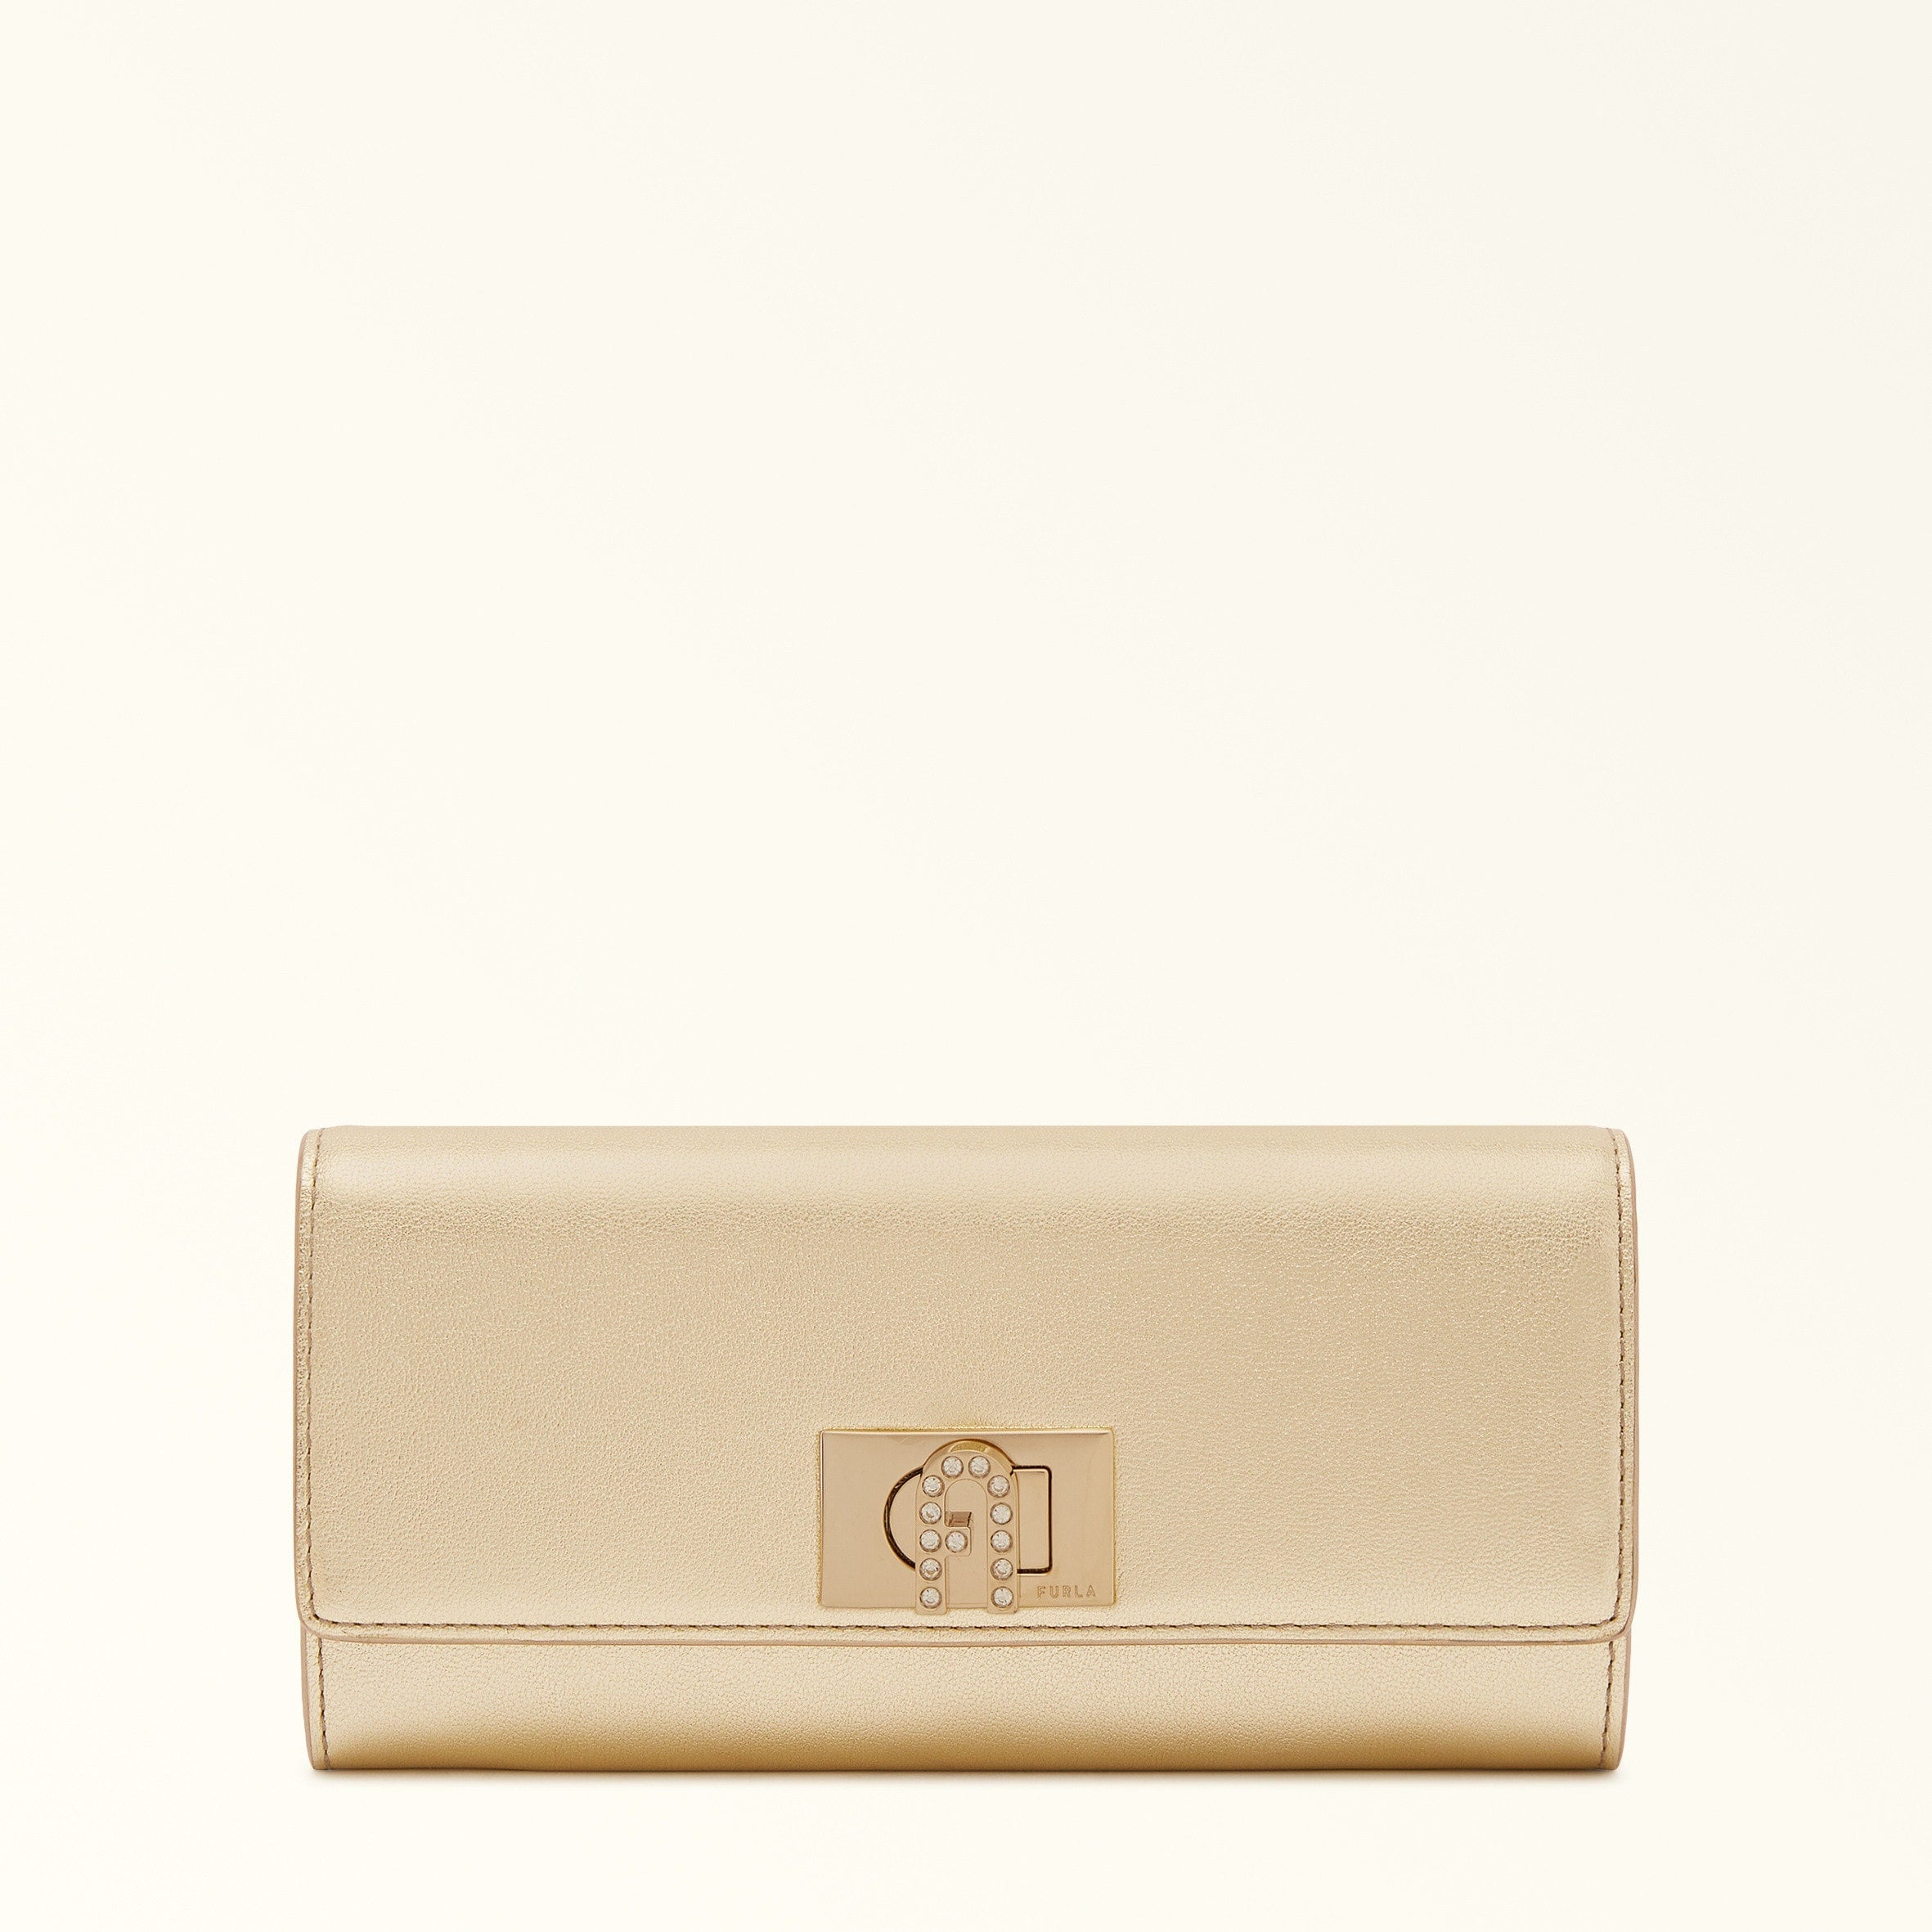 Furla 1927 Continental Wallet Gold One Size PCV0ACO PCV0ACOBX2658CGD009080